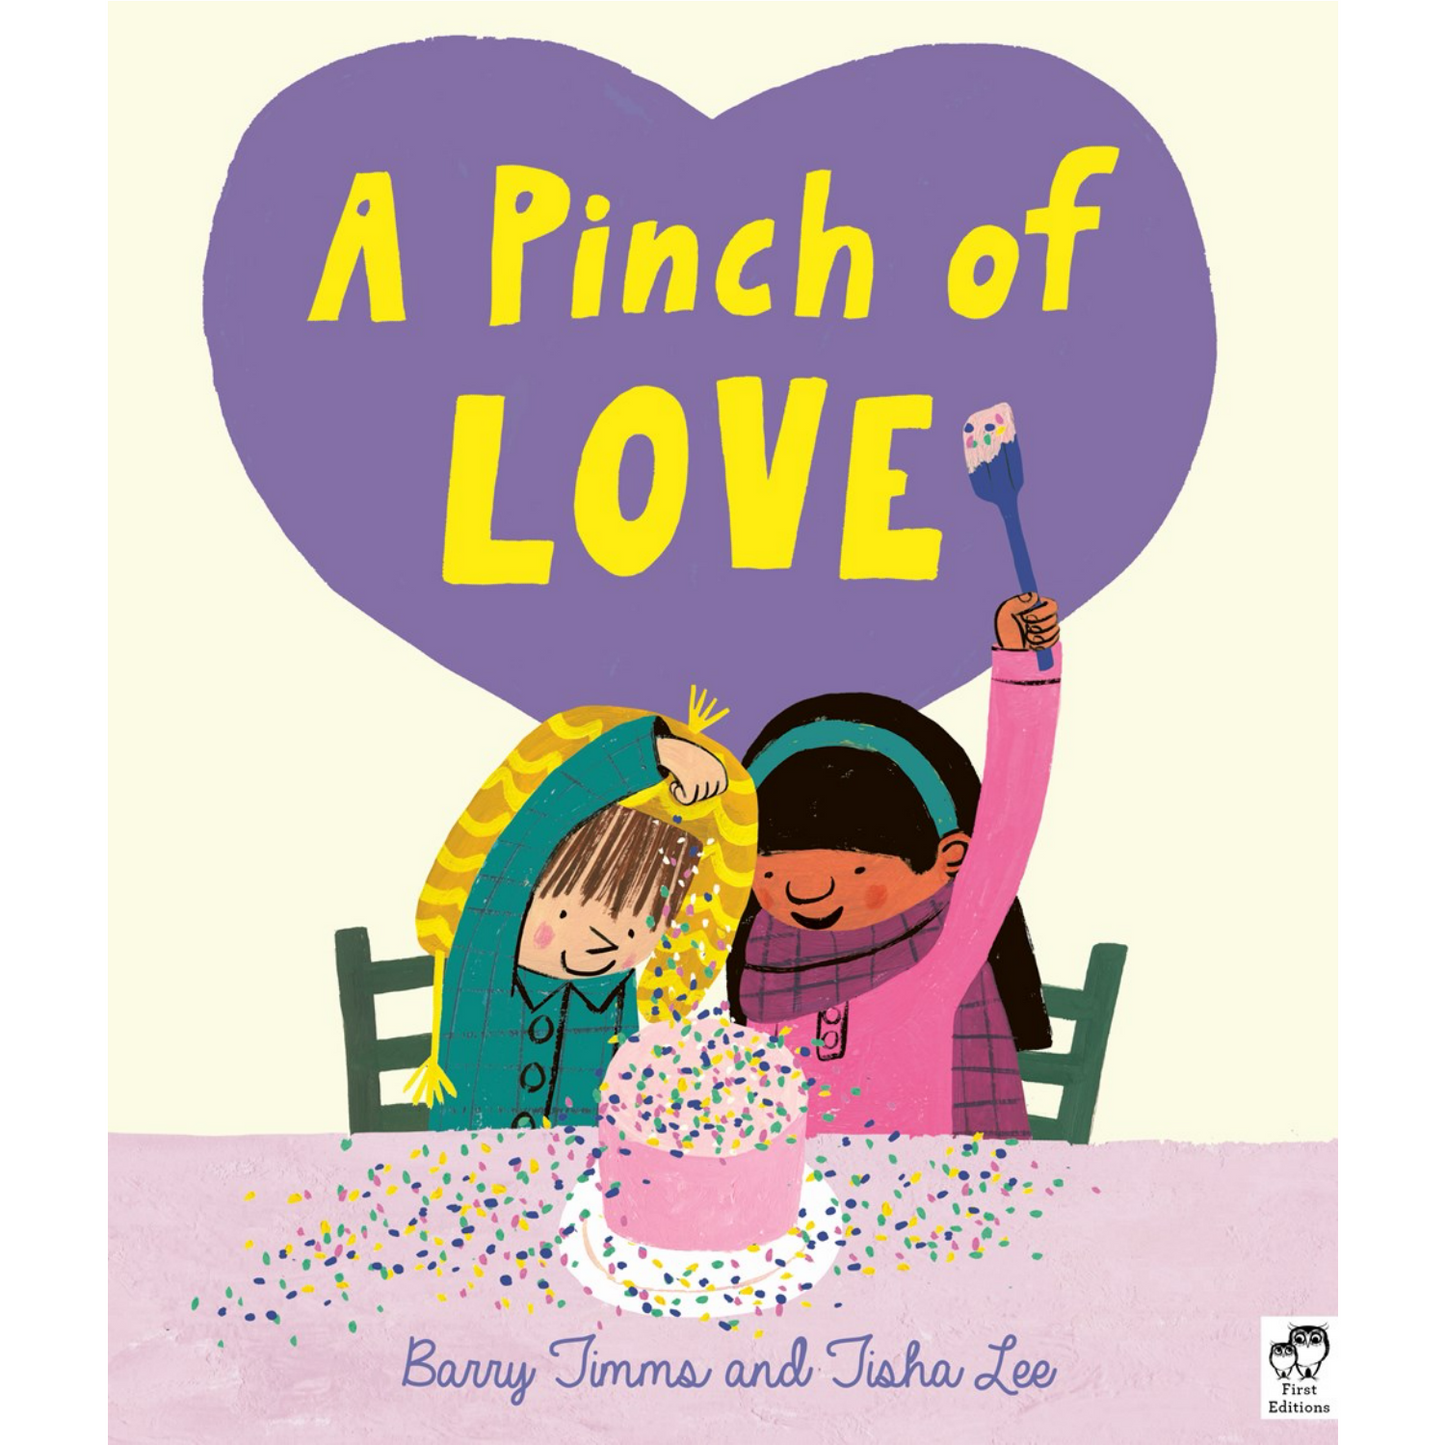 A Pinch of Love | Children's Book on Emotions & Feelings